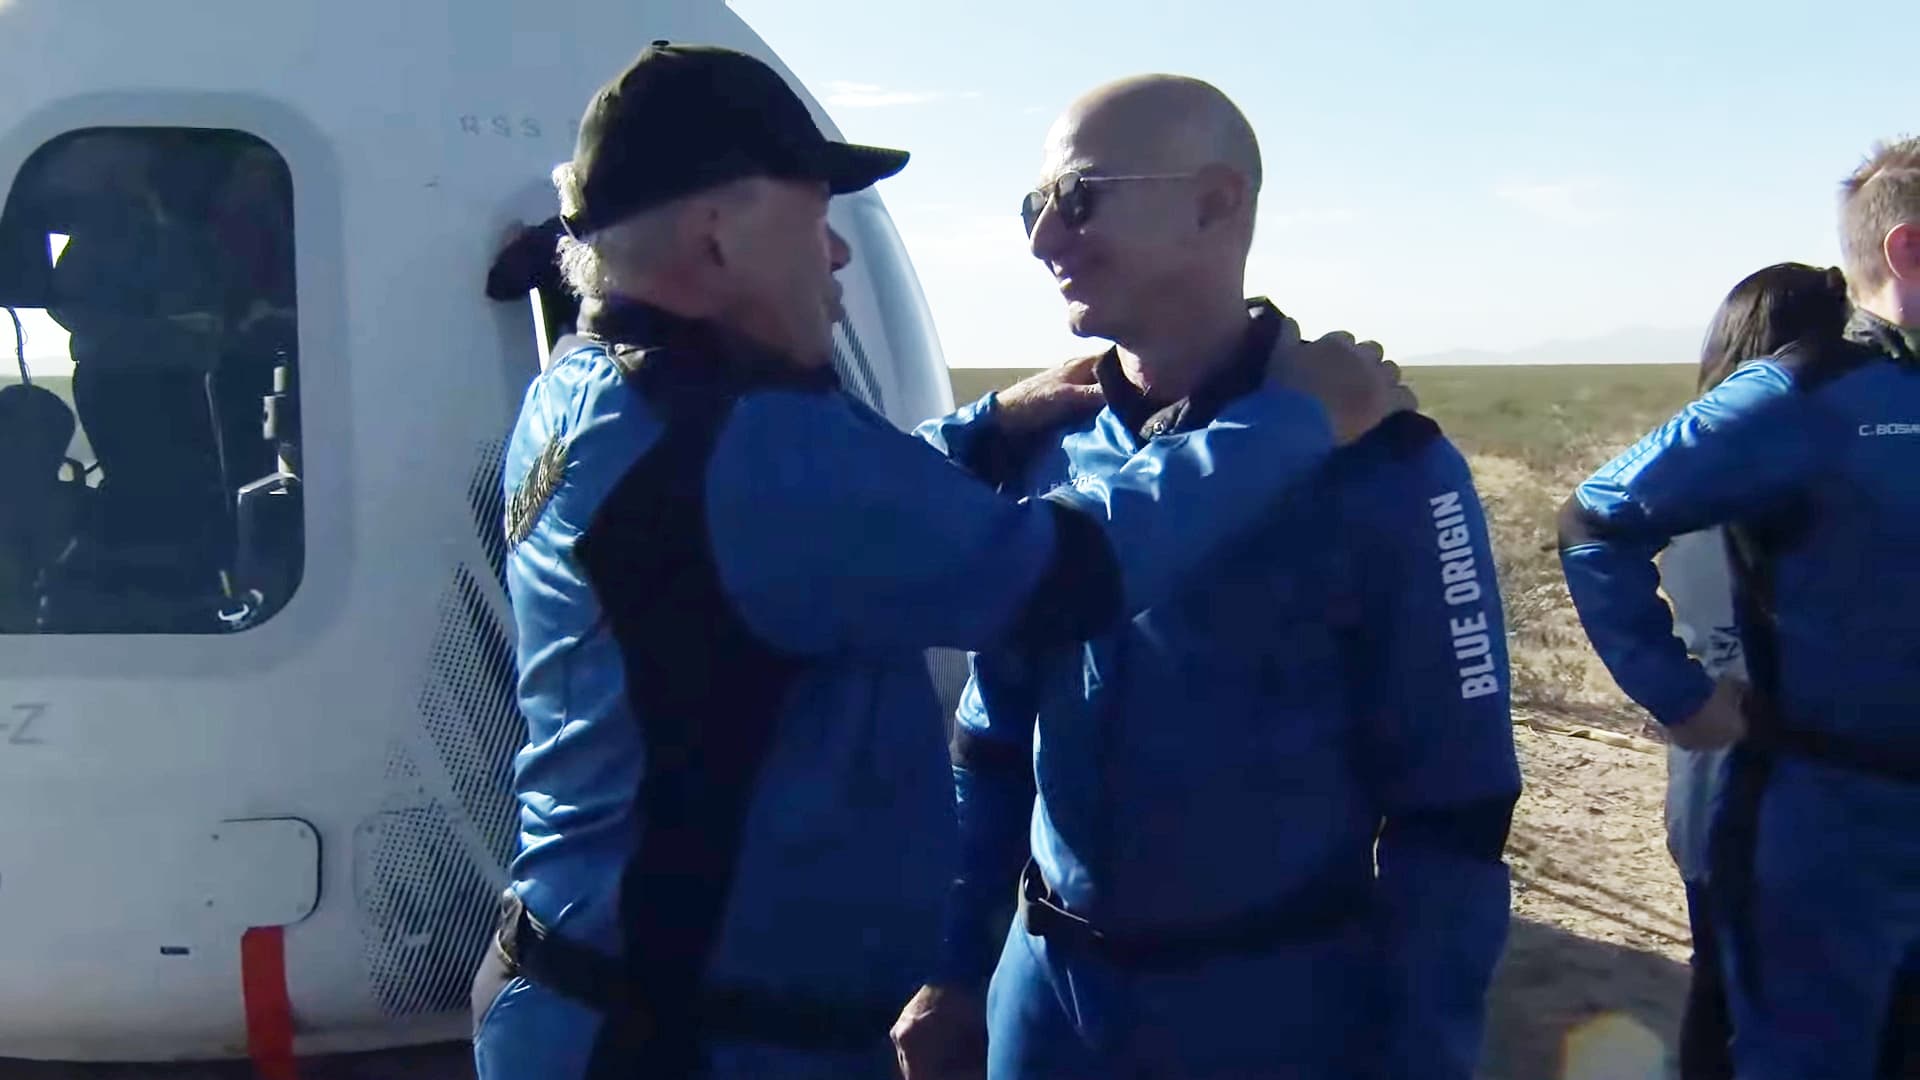 A screenshot taken from a live handout video on October 13, 2021 shows Jeff Bezos talks to William Shatner after Blue Origin's New Shepard crew capsule landed back in Texas, the United States.